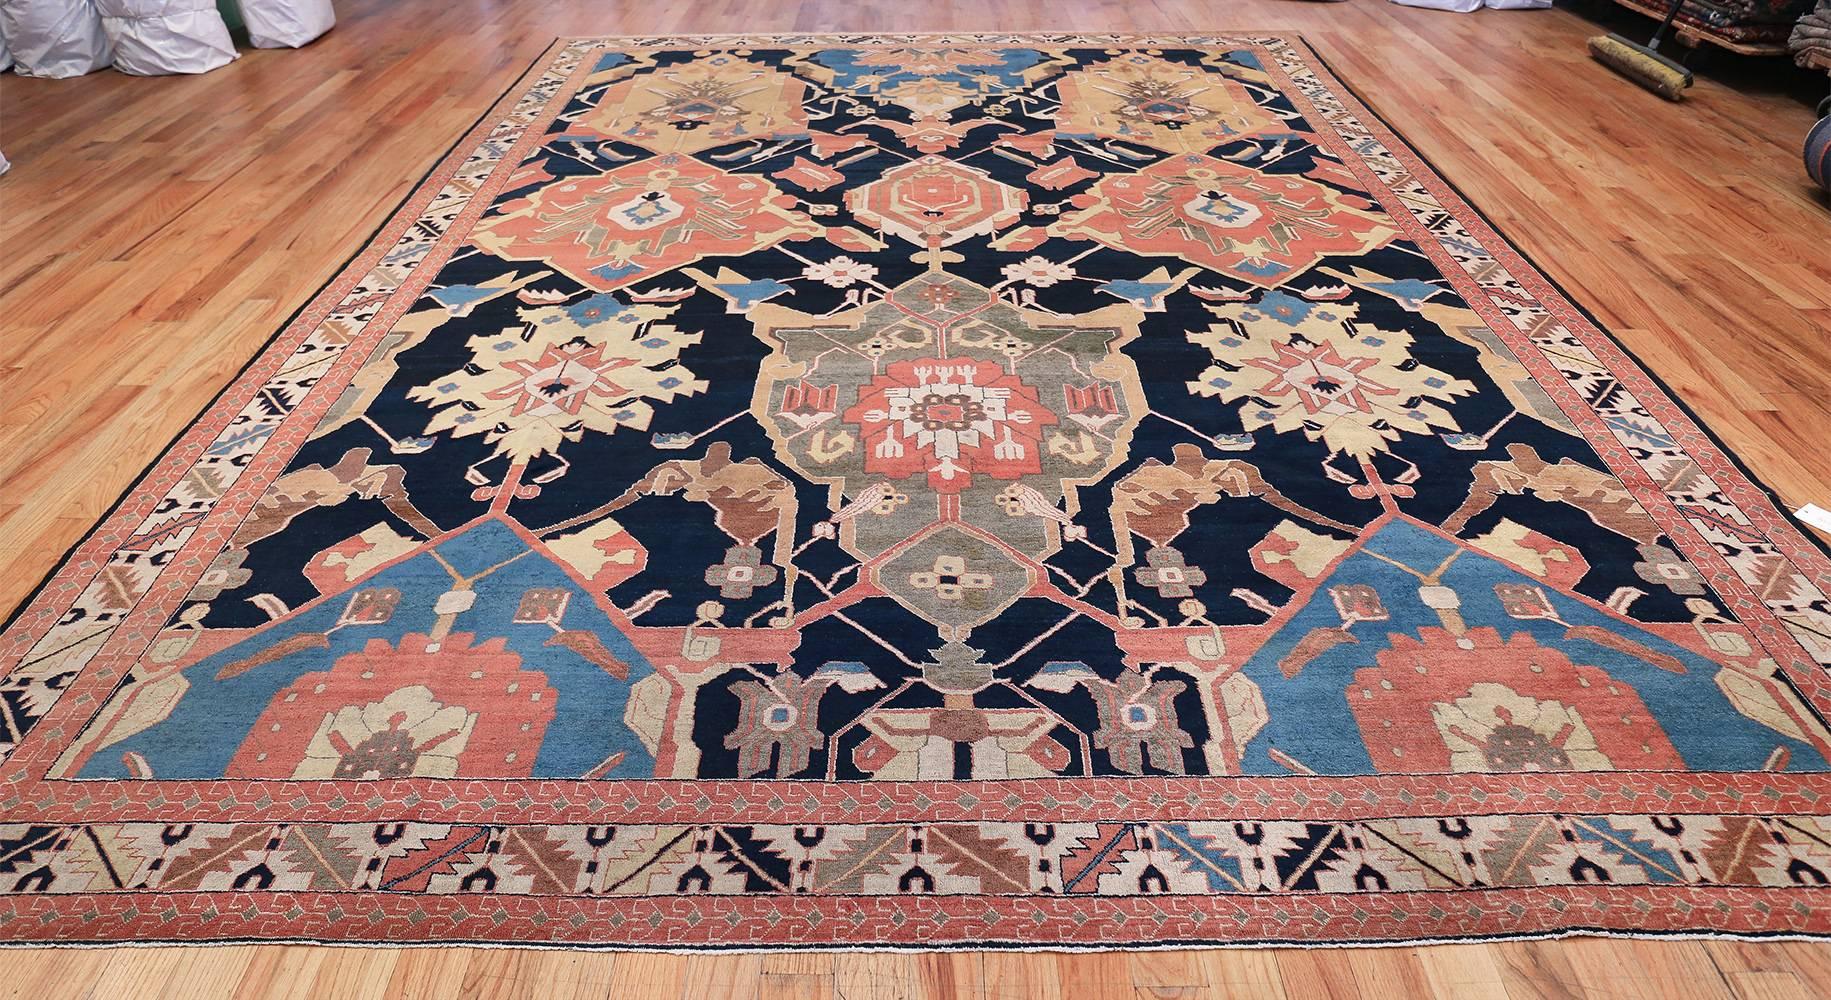 Antique Petag Persian Tabriz Rug. Size: 9 ft 9 in x 14 ft 2 in (2.97 m x 4.32 m) 10